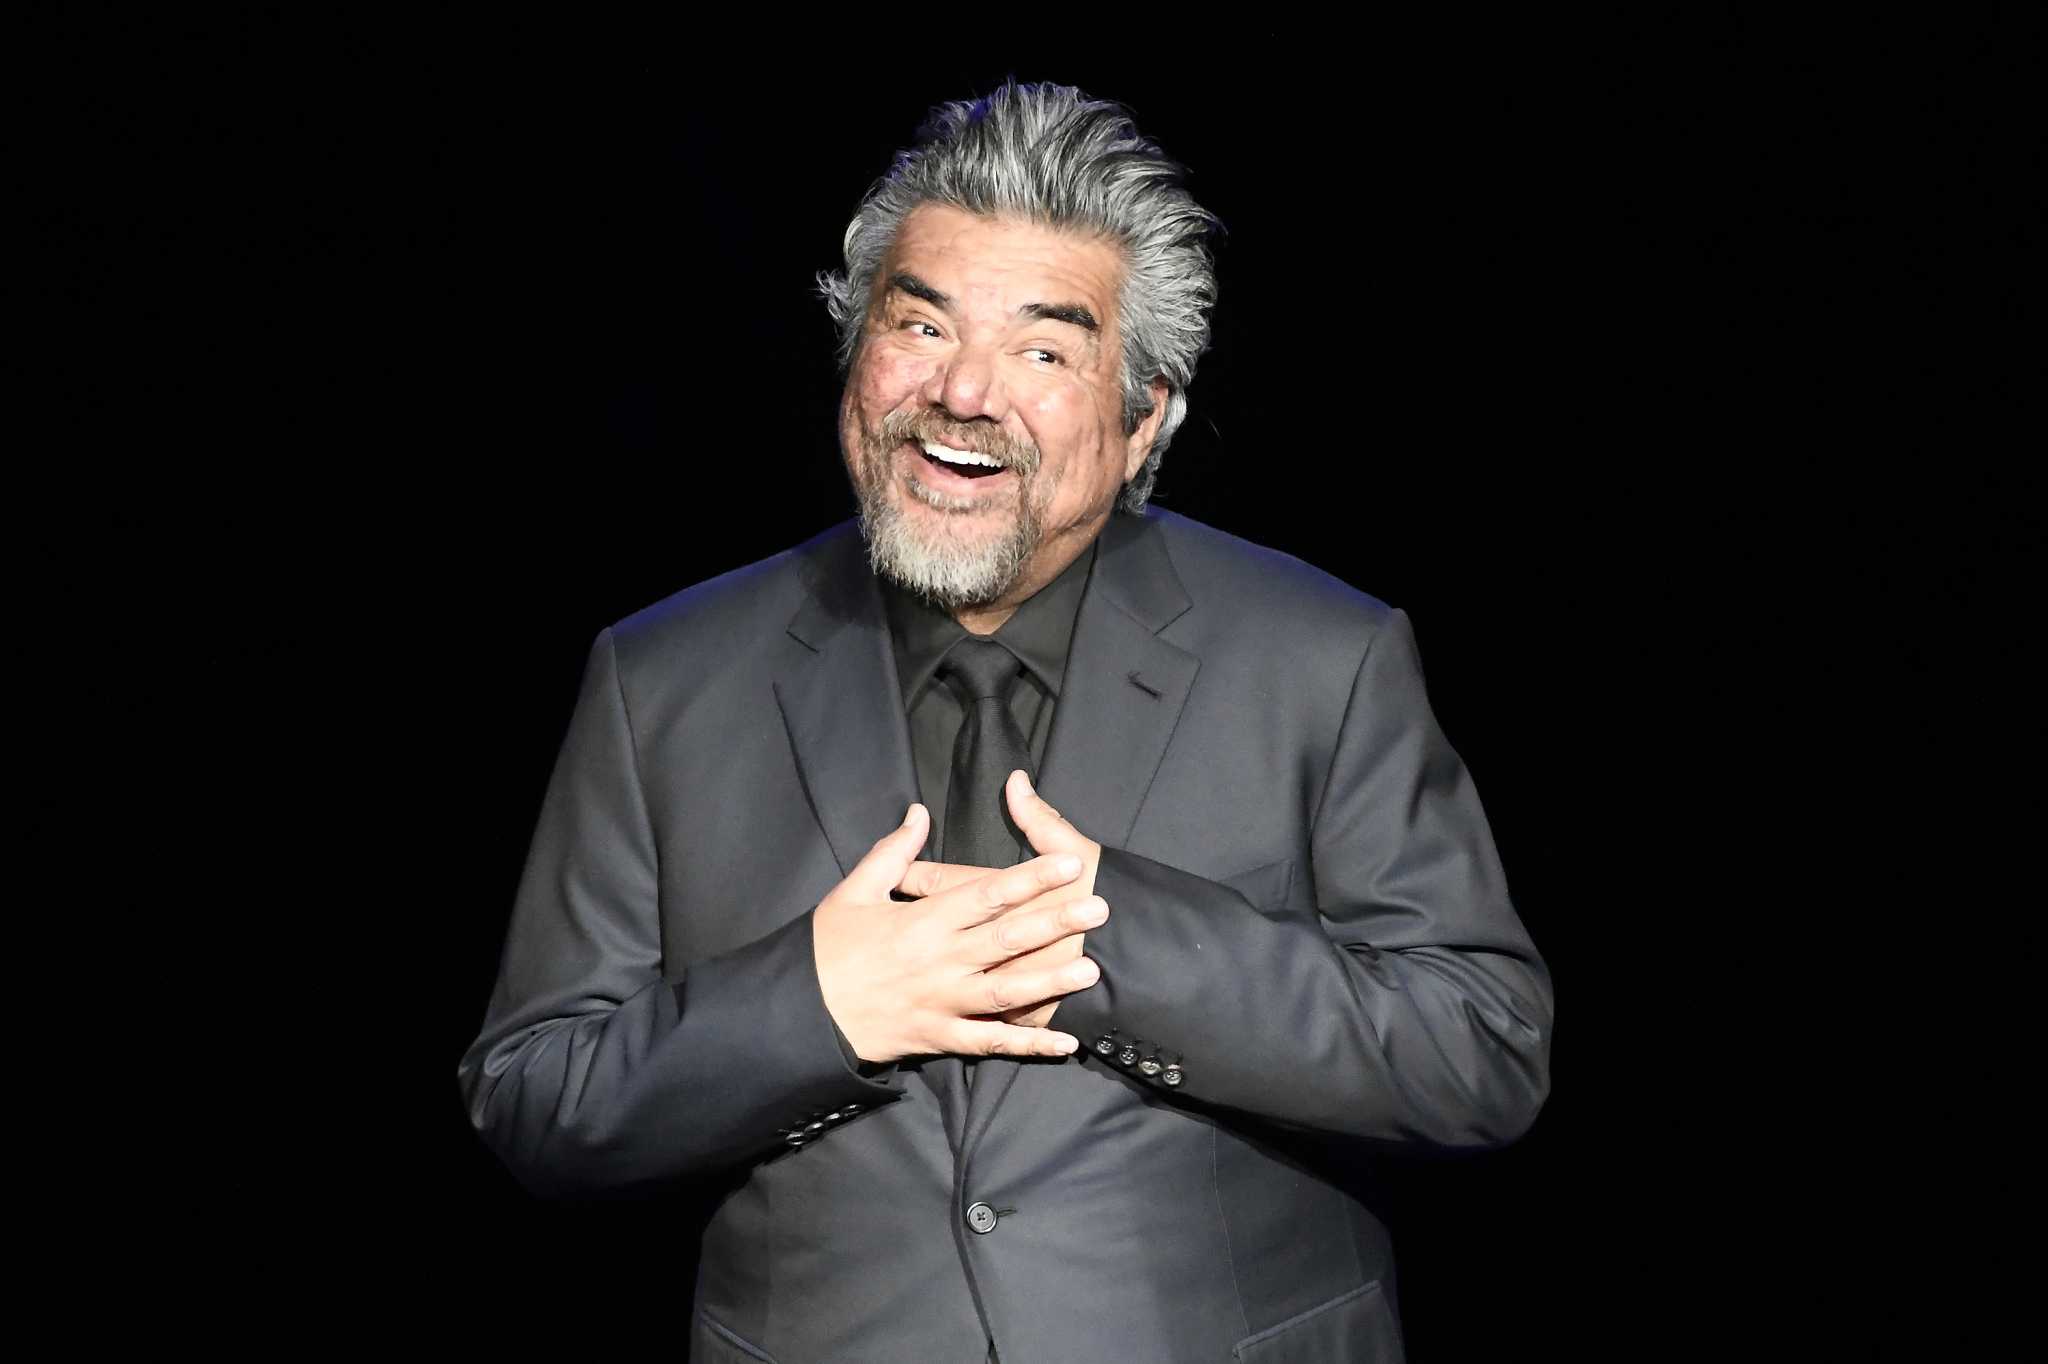 California casino apologizes after George Lopez show cut short